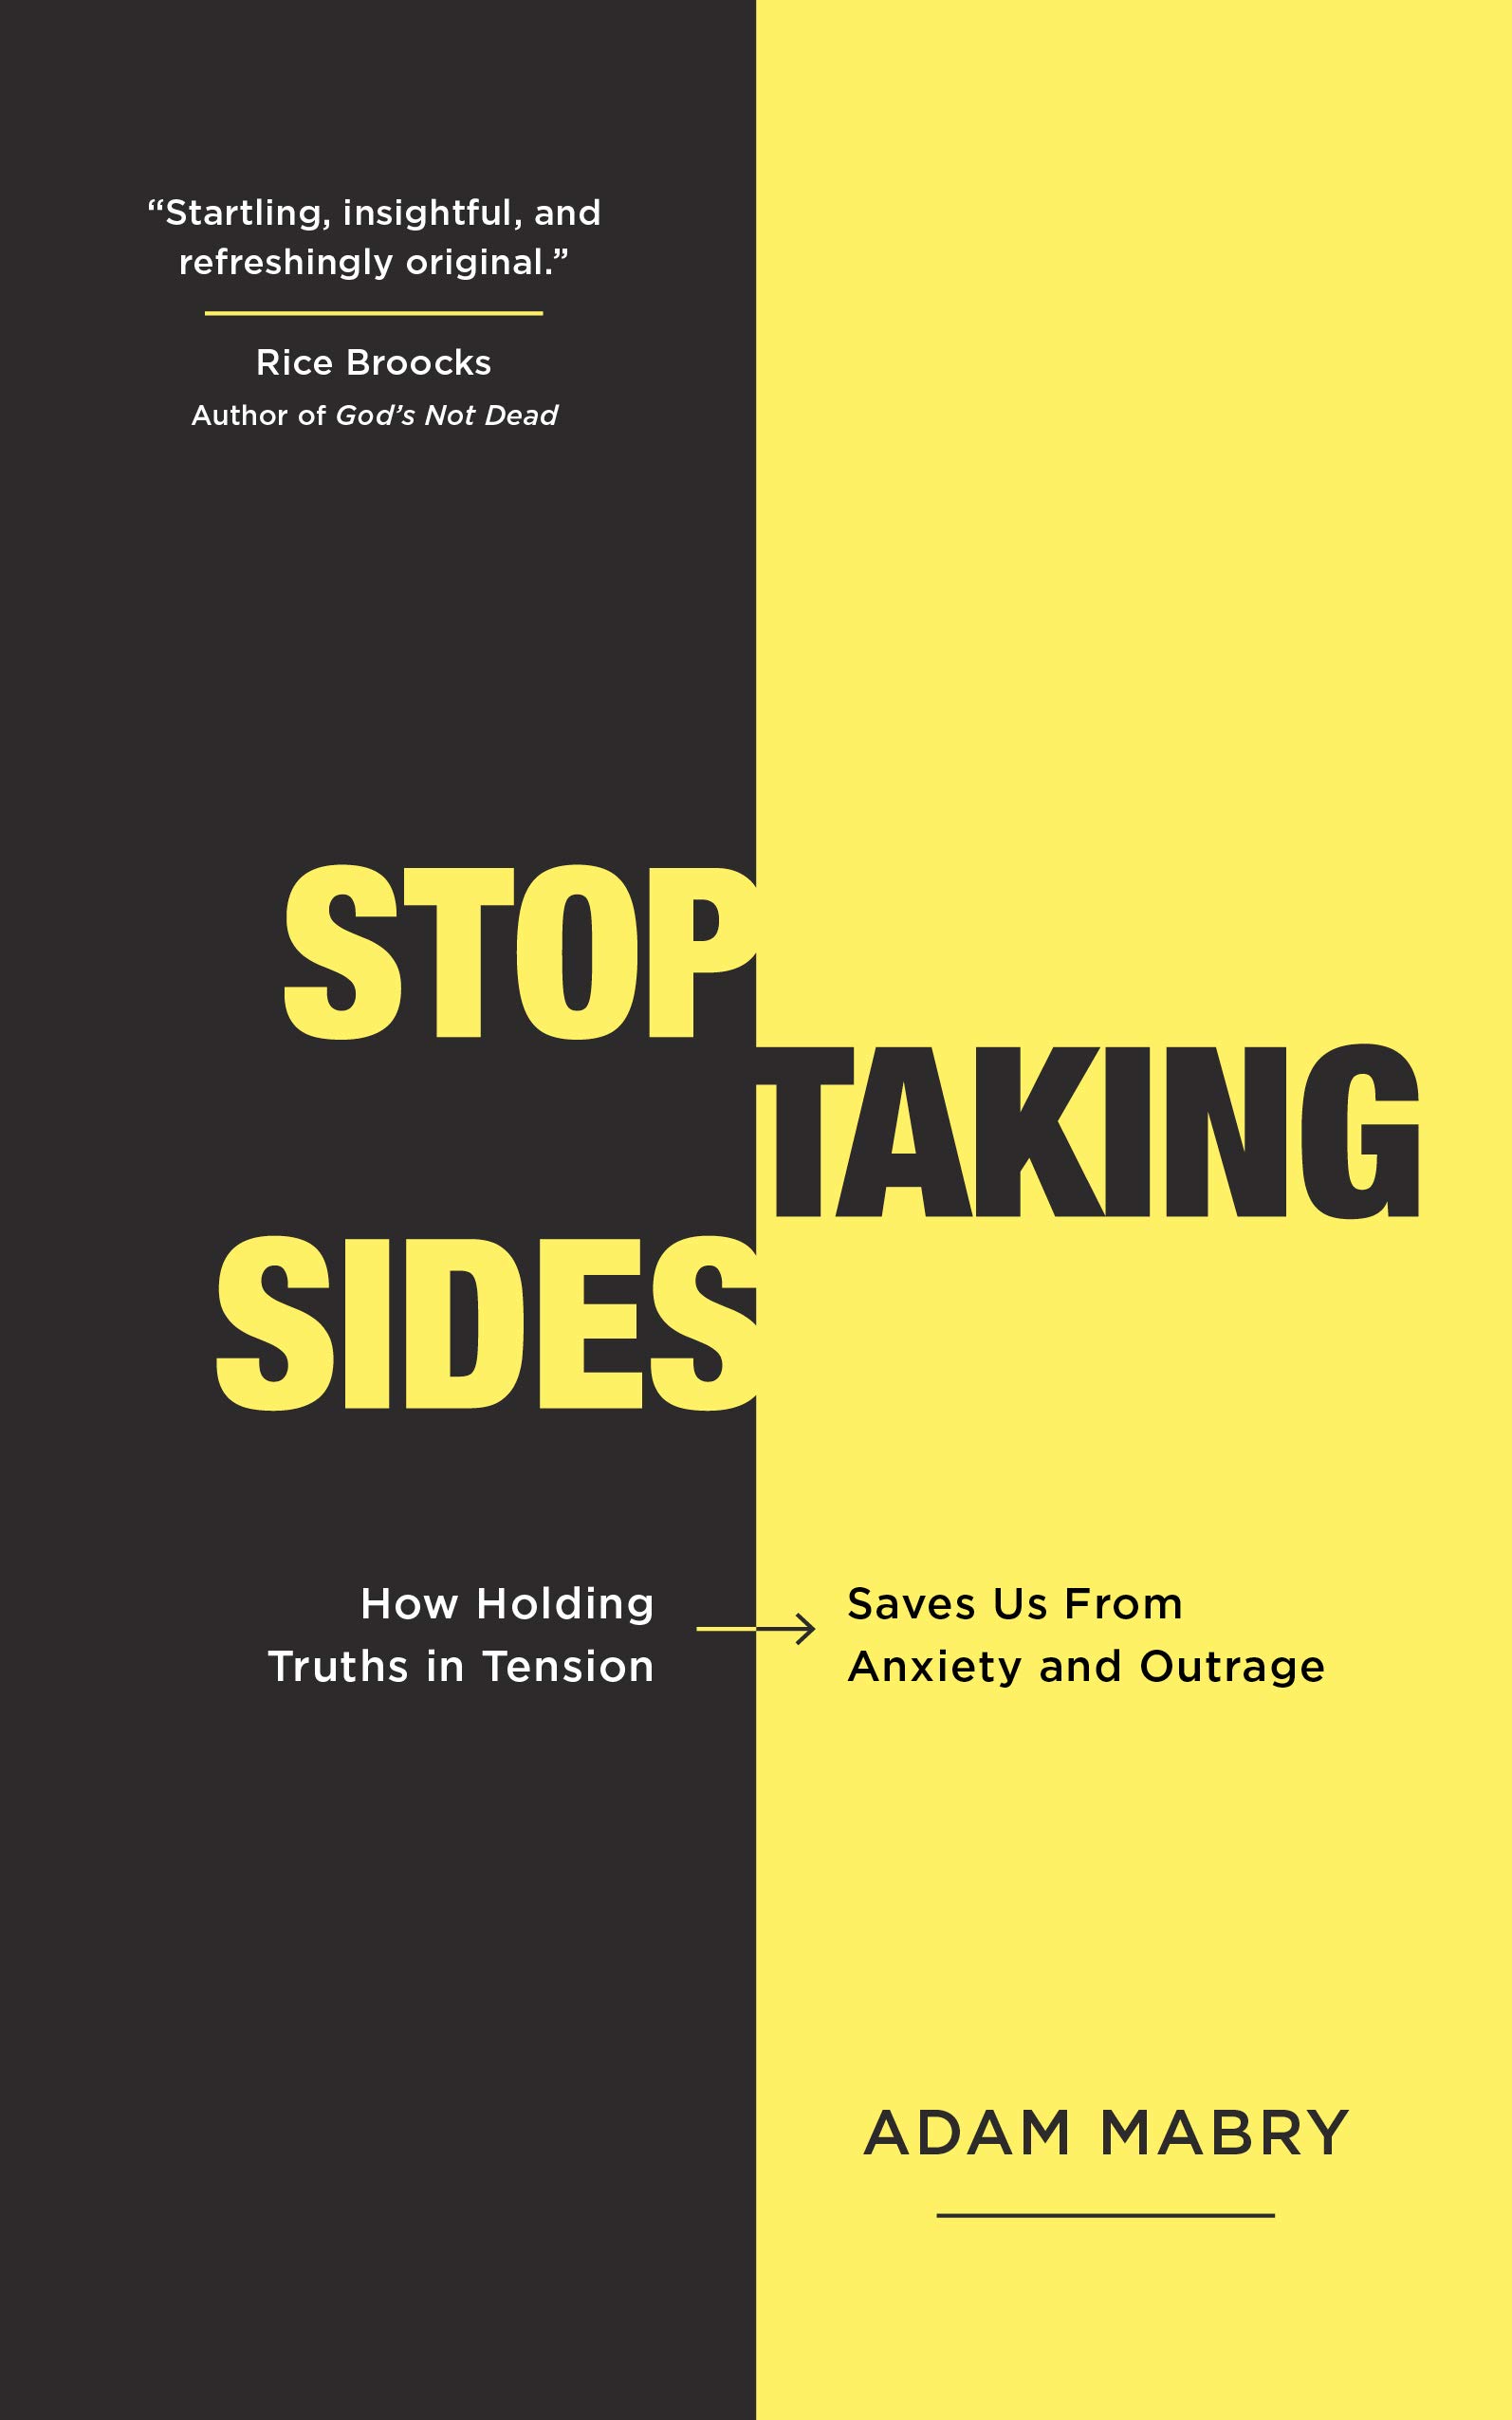 Stop Taking Sides: How Holding Truths in Tension Saves Us from Anxiety and Outrage-image